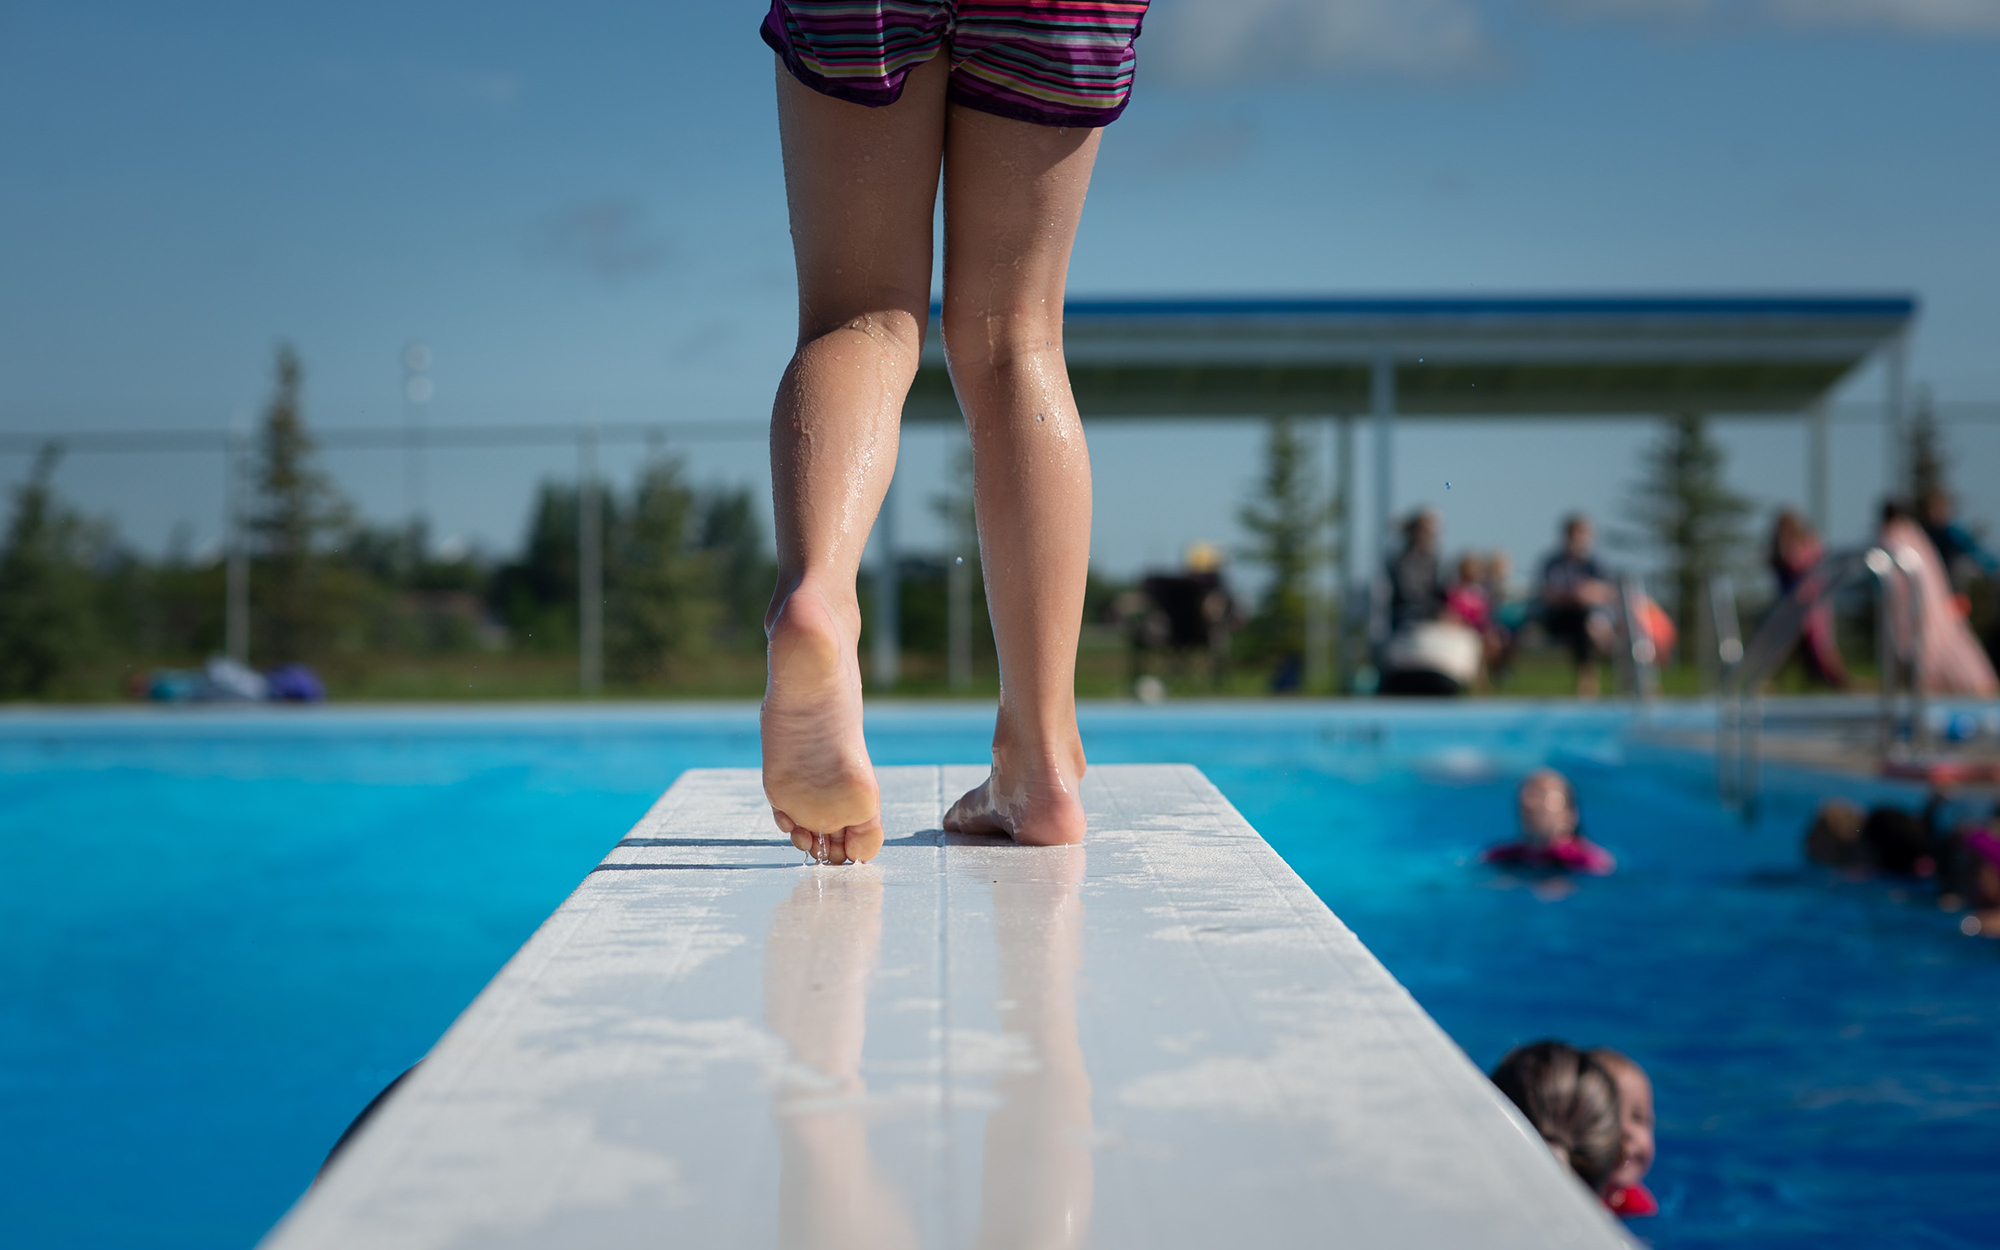 Know How To Stay Safe Before Using Diving Boards And Pool Slides Pool